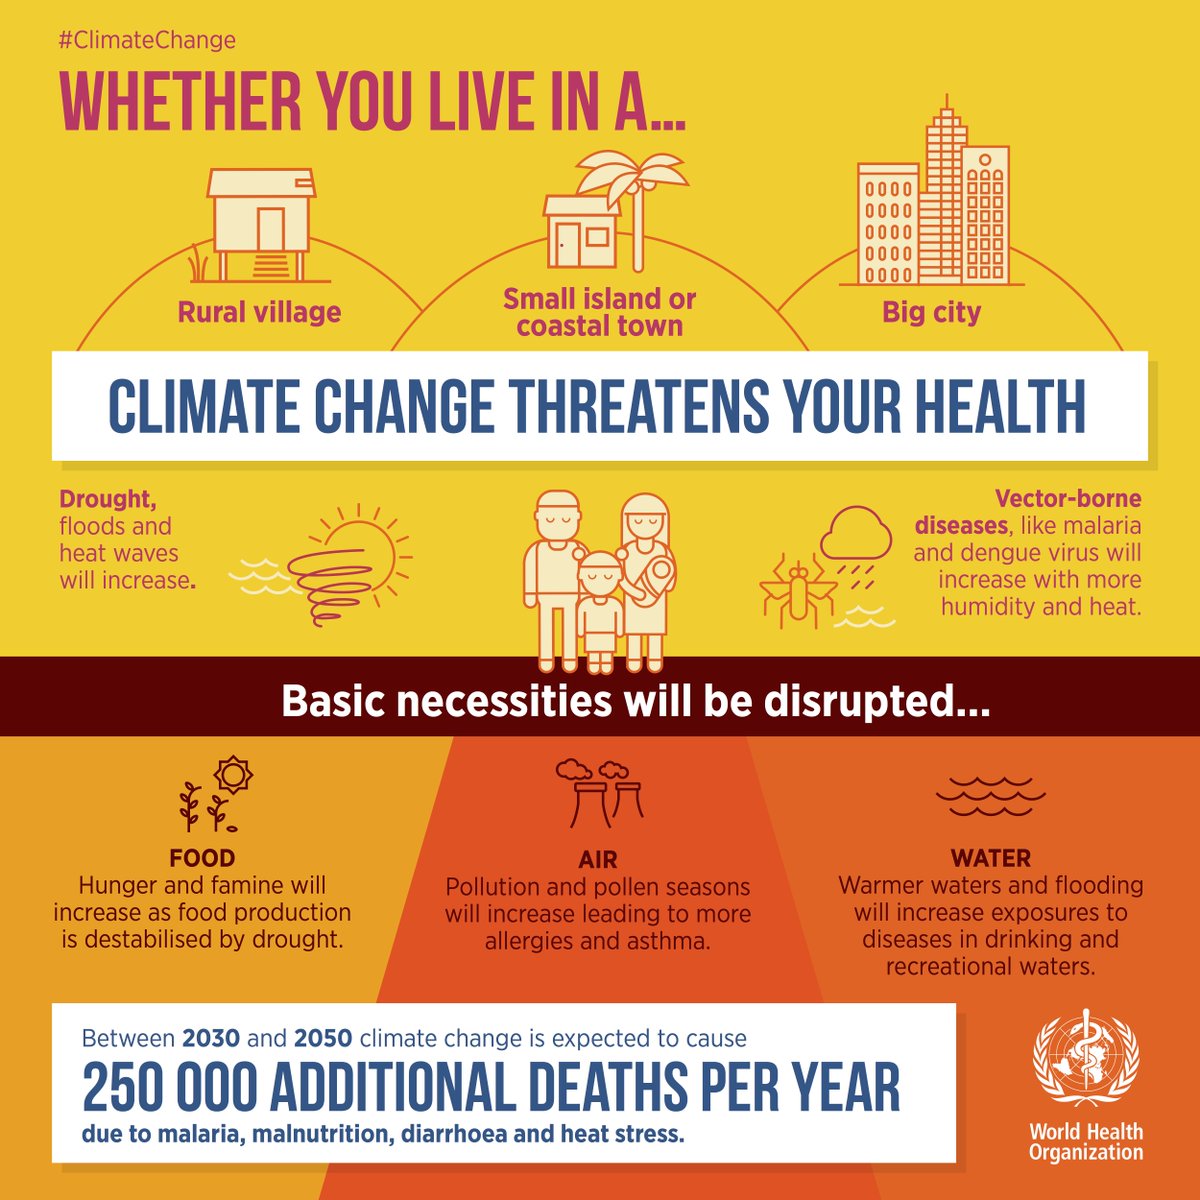 #ClimateChange expected to add +250 000 deaths per yr btw 2030-50. #HealthAndClimate goo.gl/BZFJu1